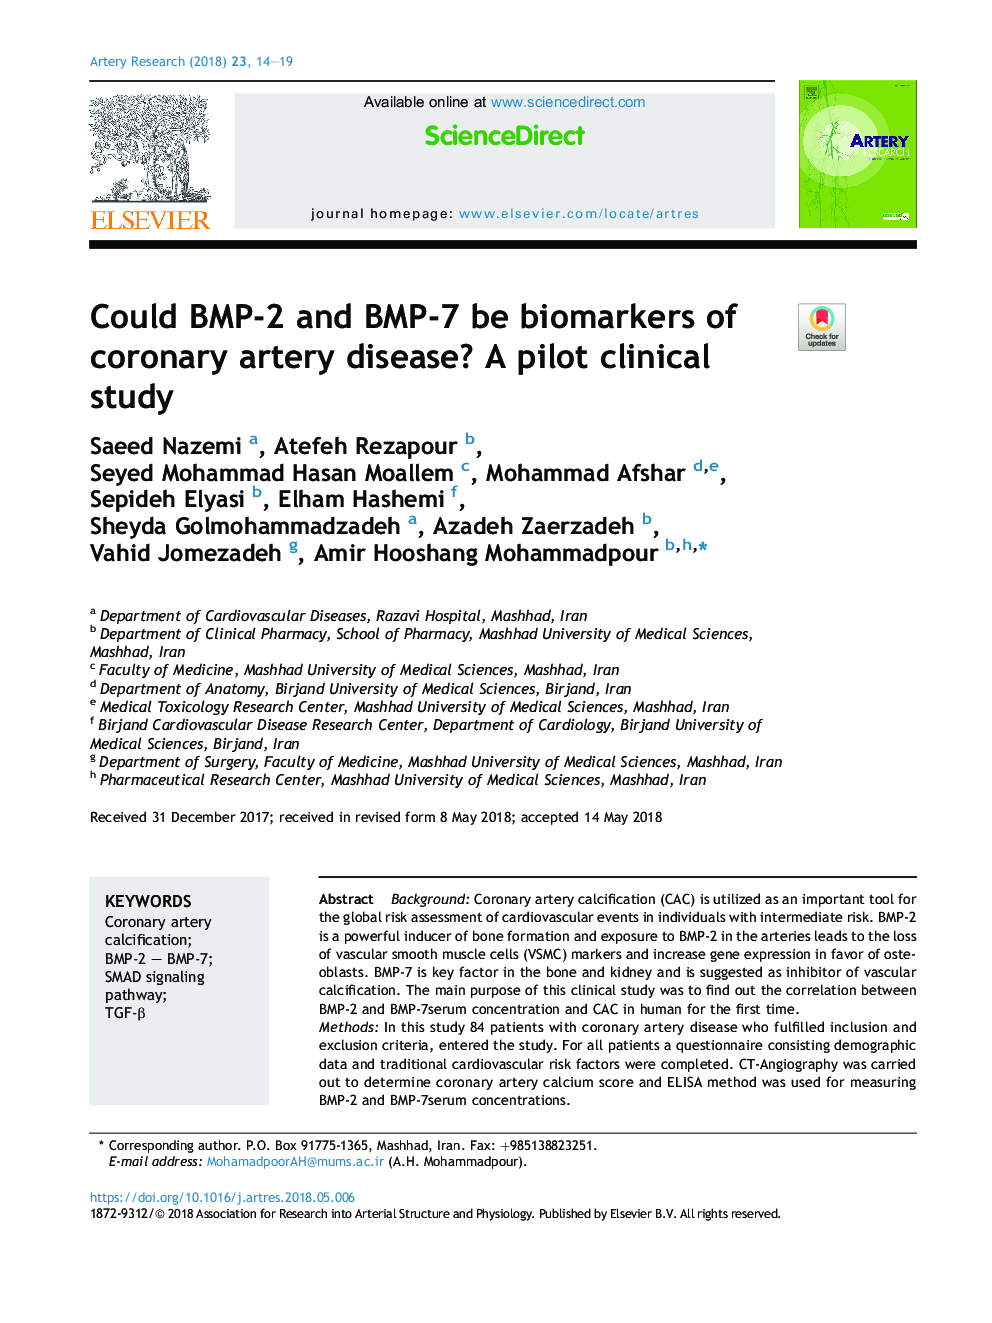 Could BMP-2 and BMP-7 be biomarkers of coronary artery disease? A pilot clinical study